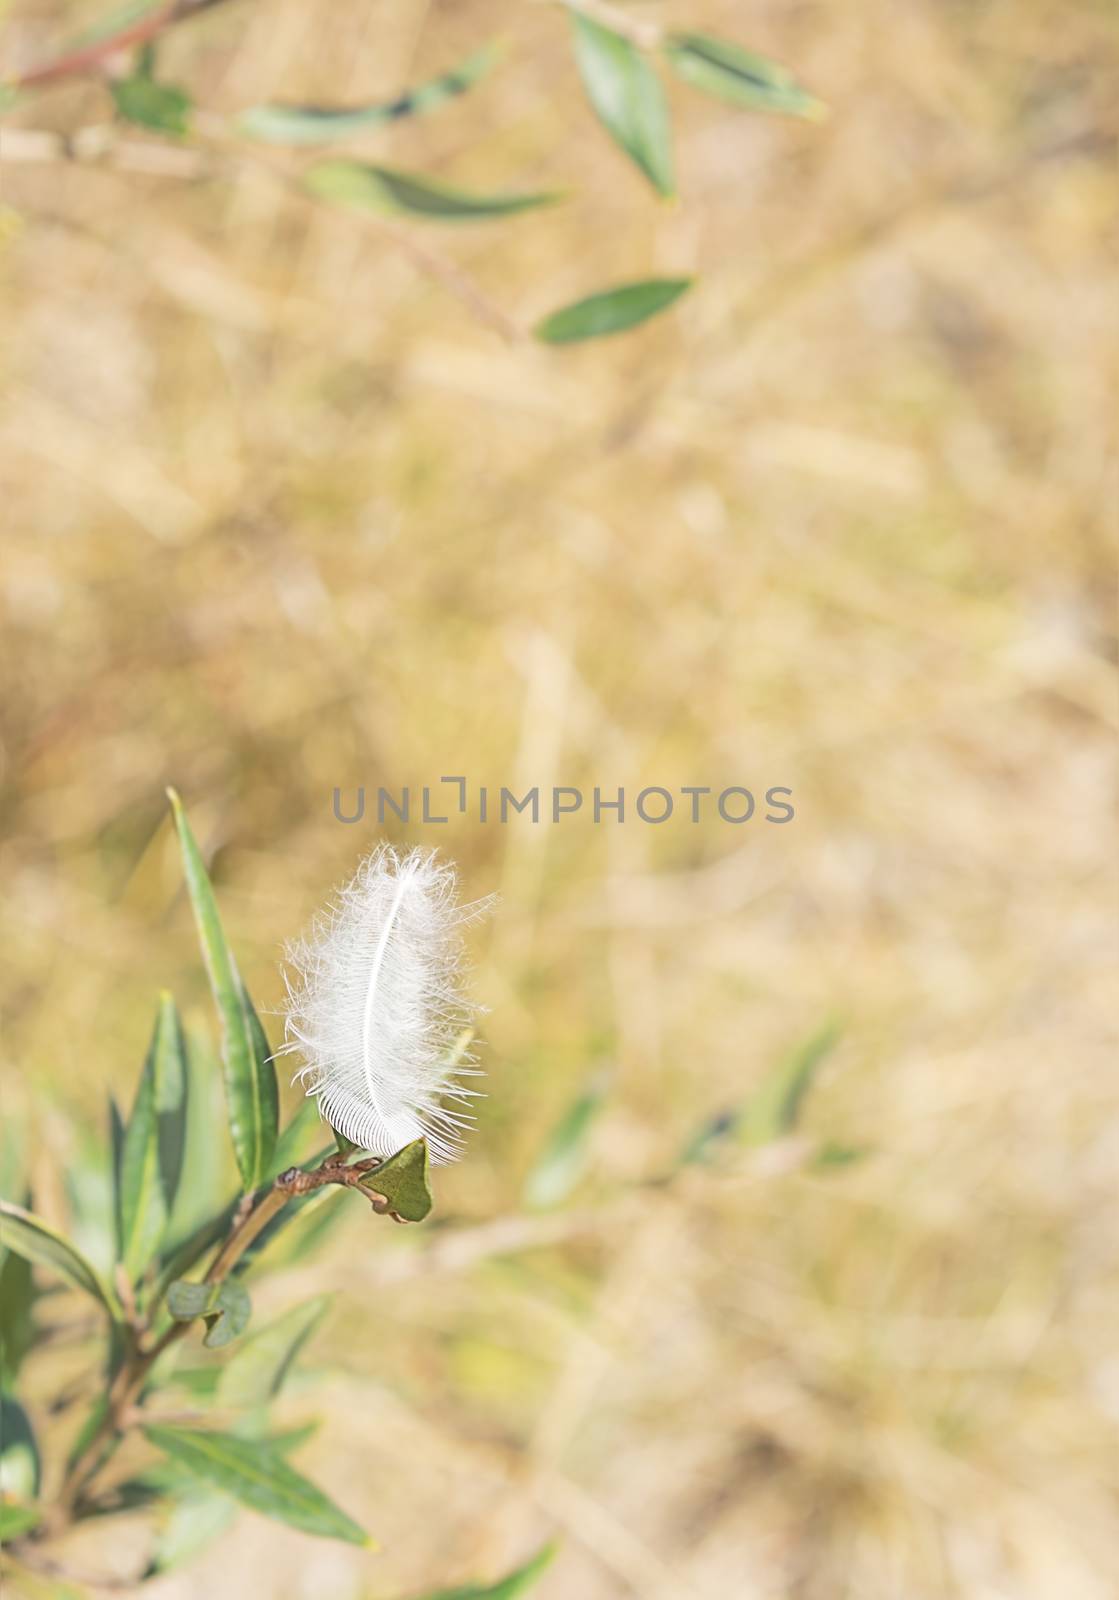 White downy peaceful fluffy feather in a light breeze concept of freedom, ease, relaxation, carefree or condolence background